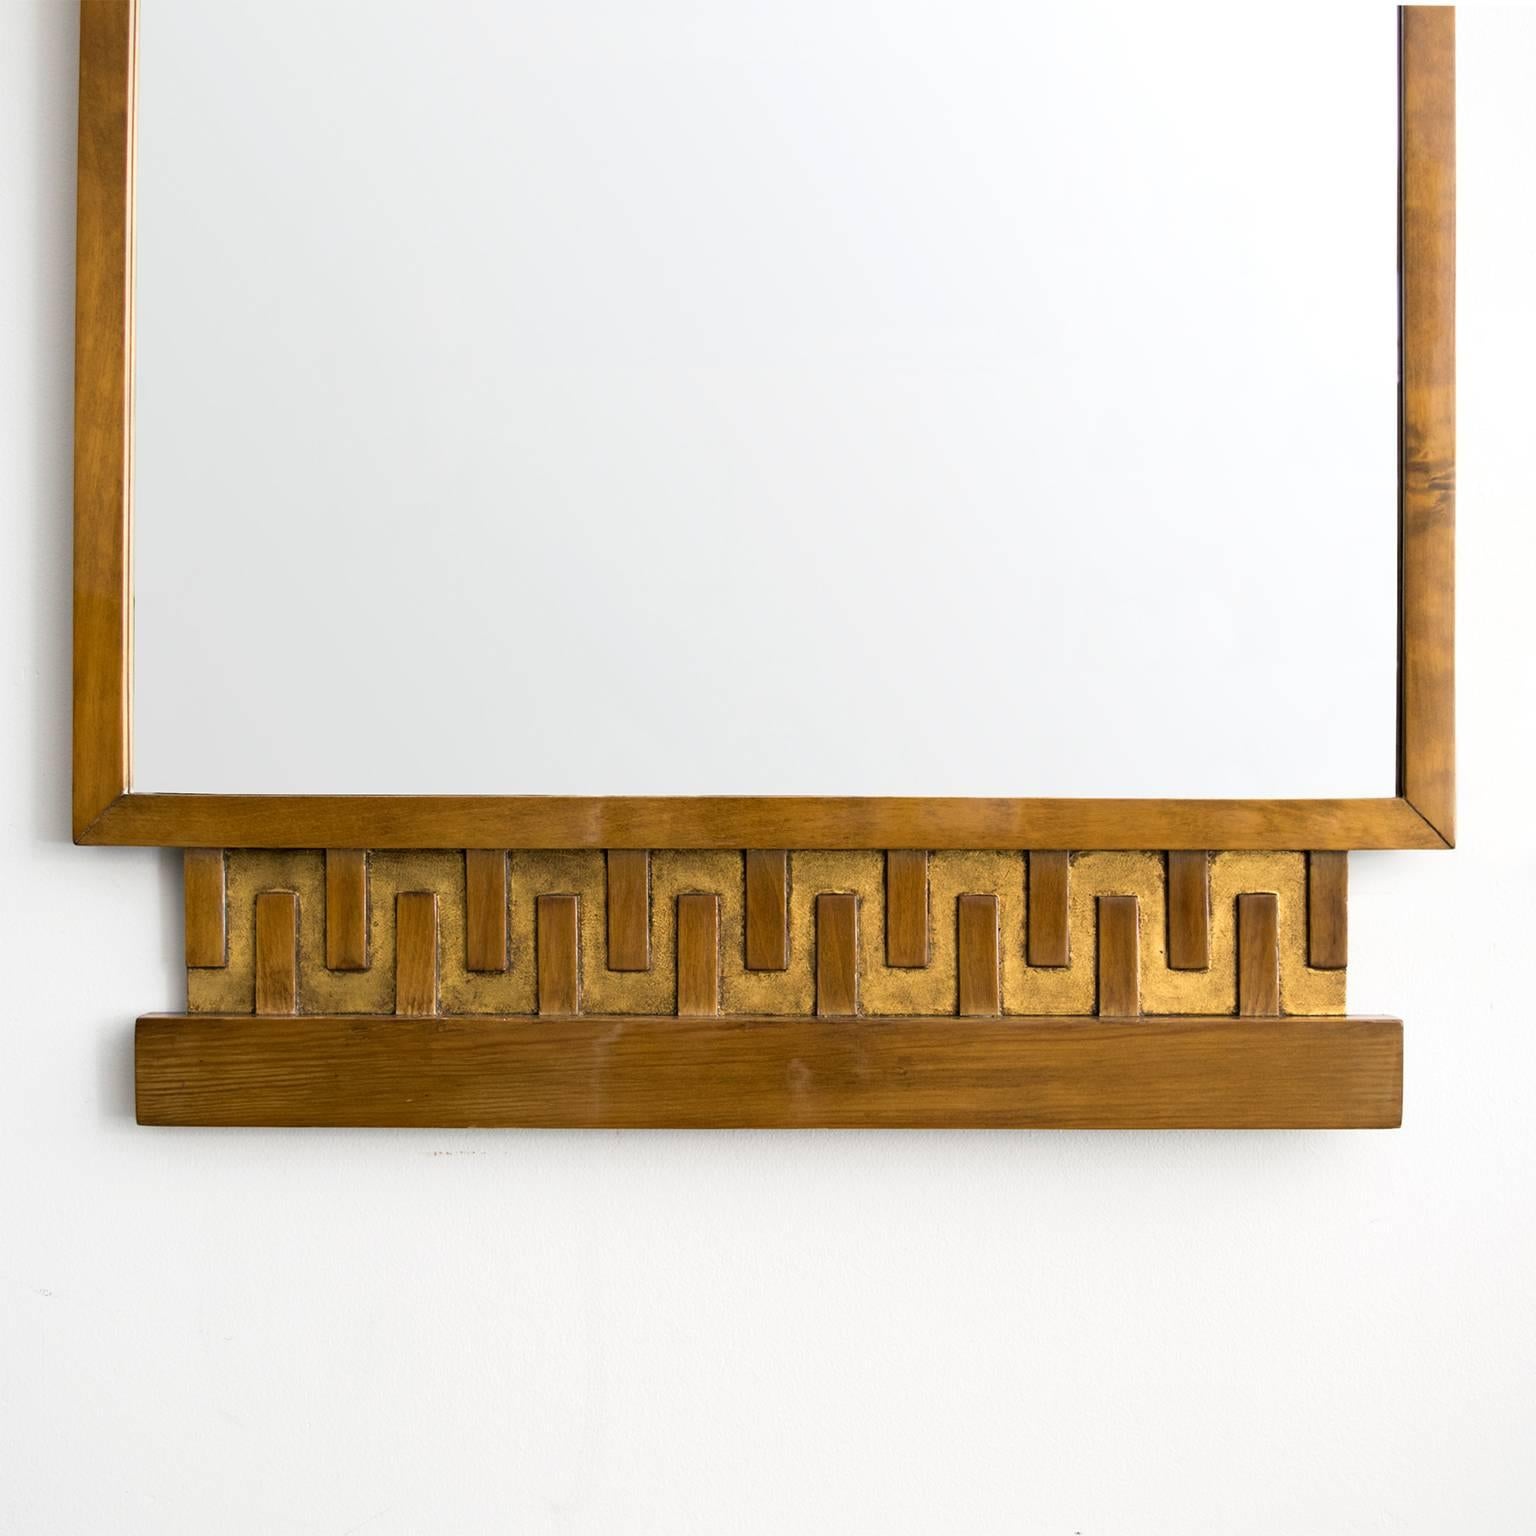 20th Century Scandinavian Modern, Art Deco Stained and Giltwood Meander Mirror